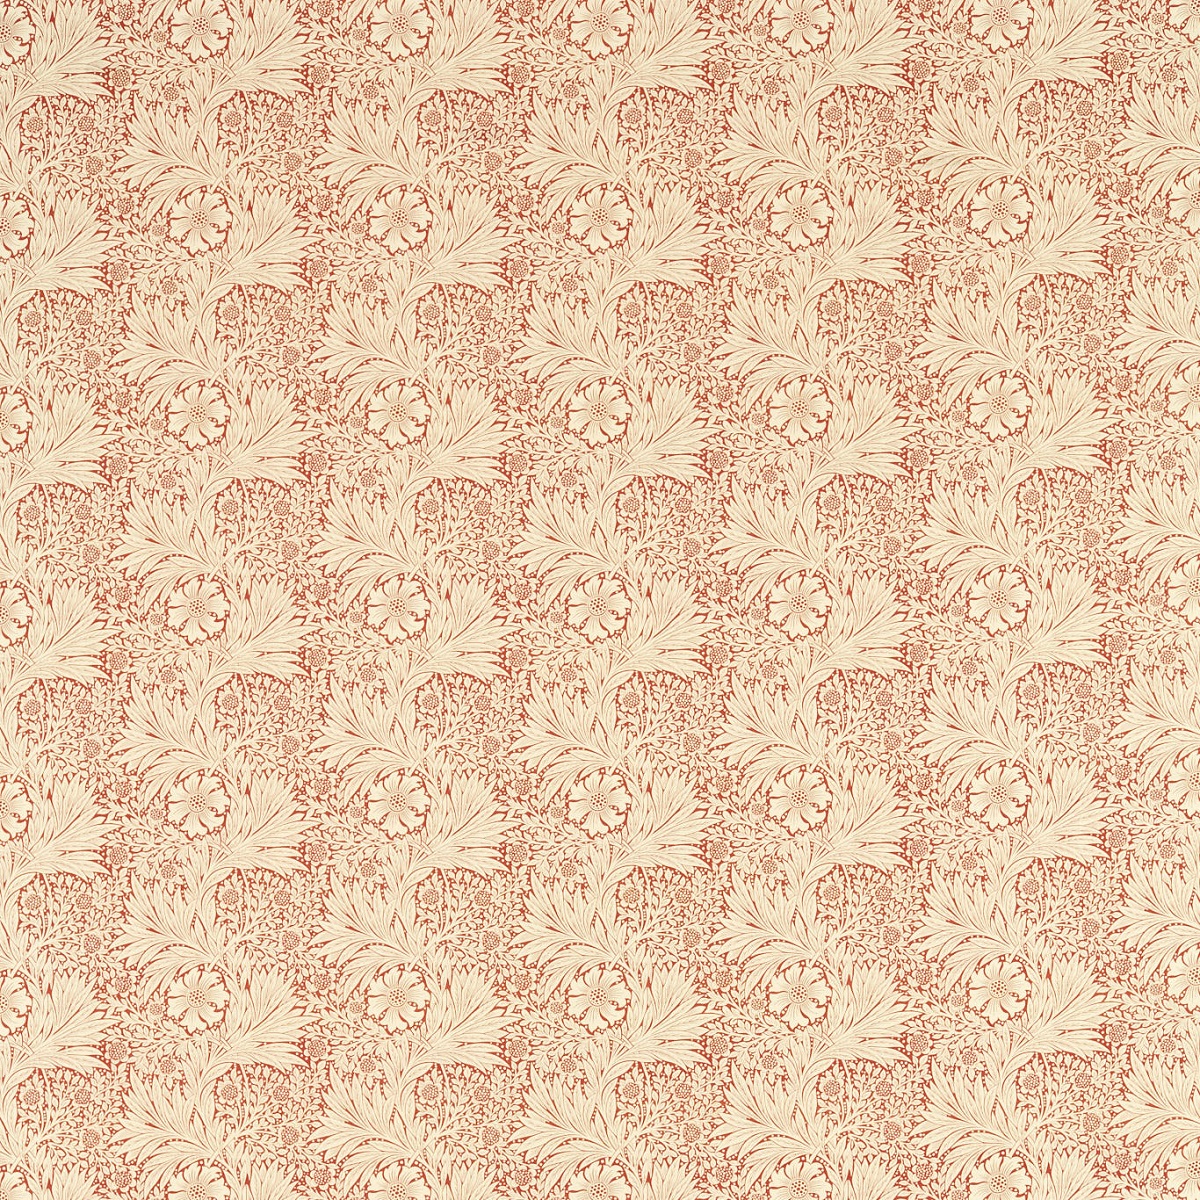 Marigold design fabric from Morris & Co